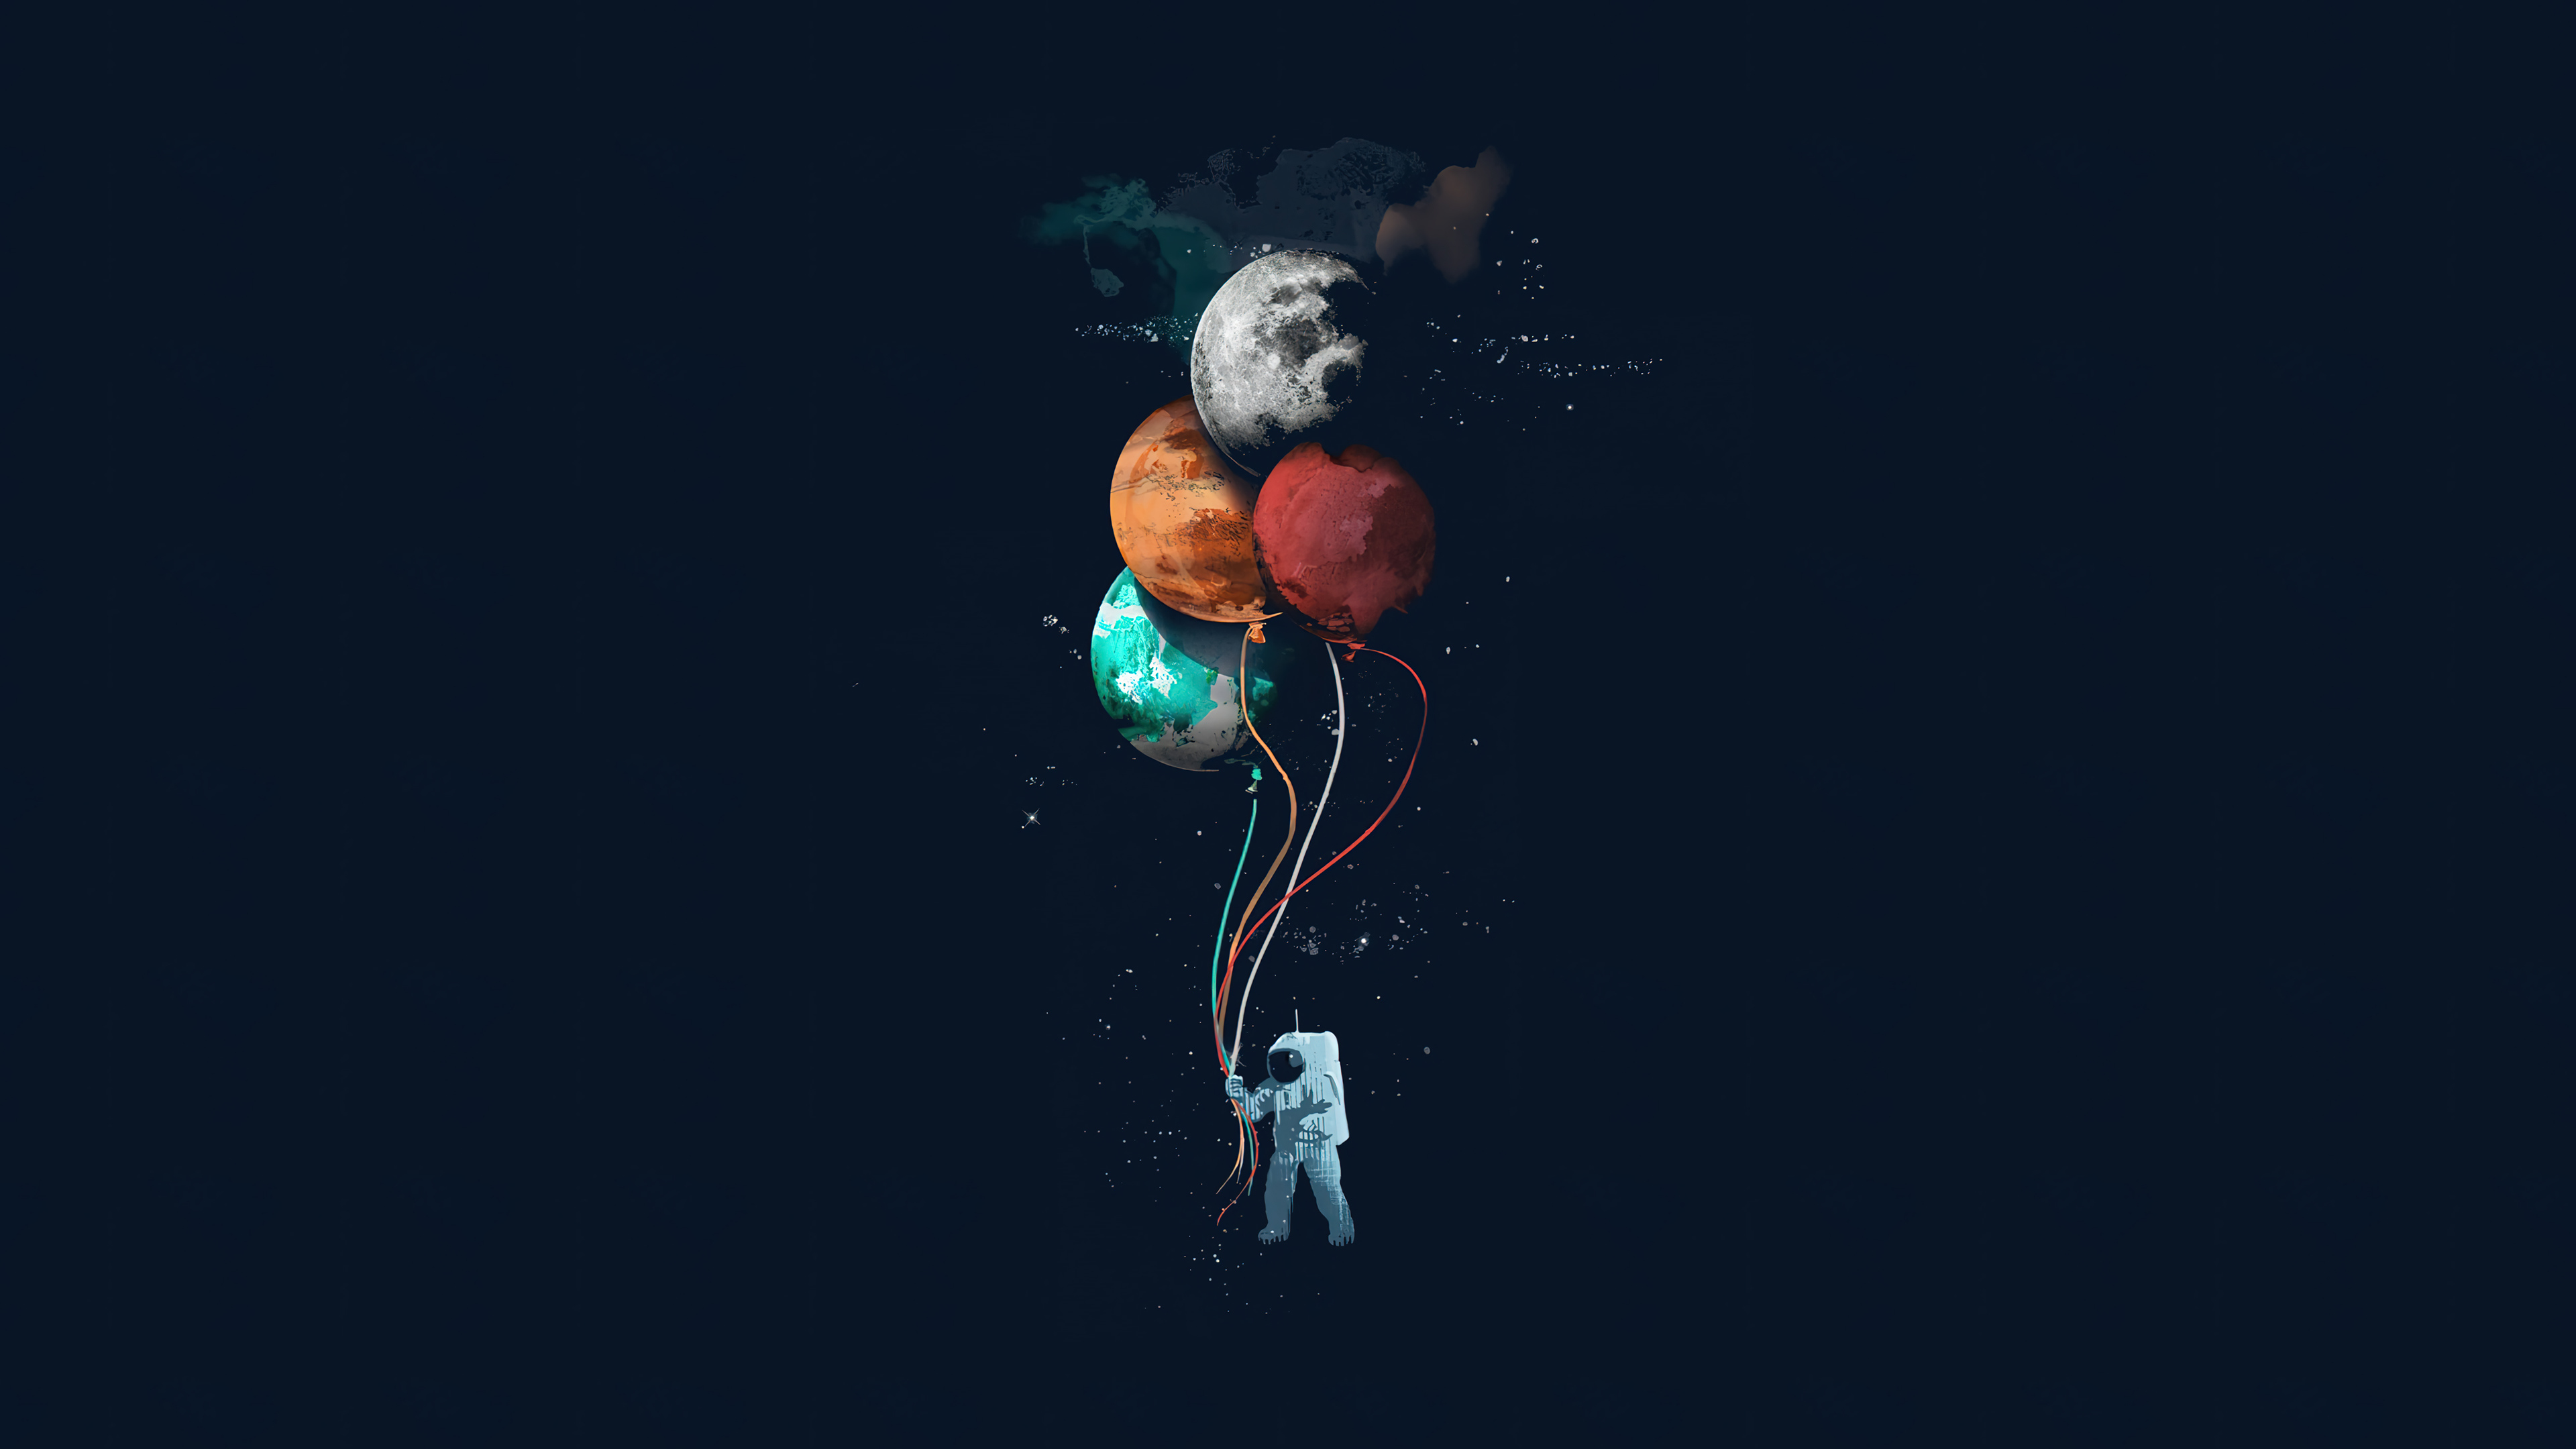 Wallpaper Astronaut with planets as balloons